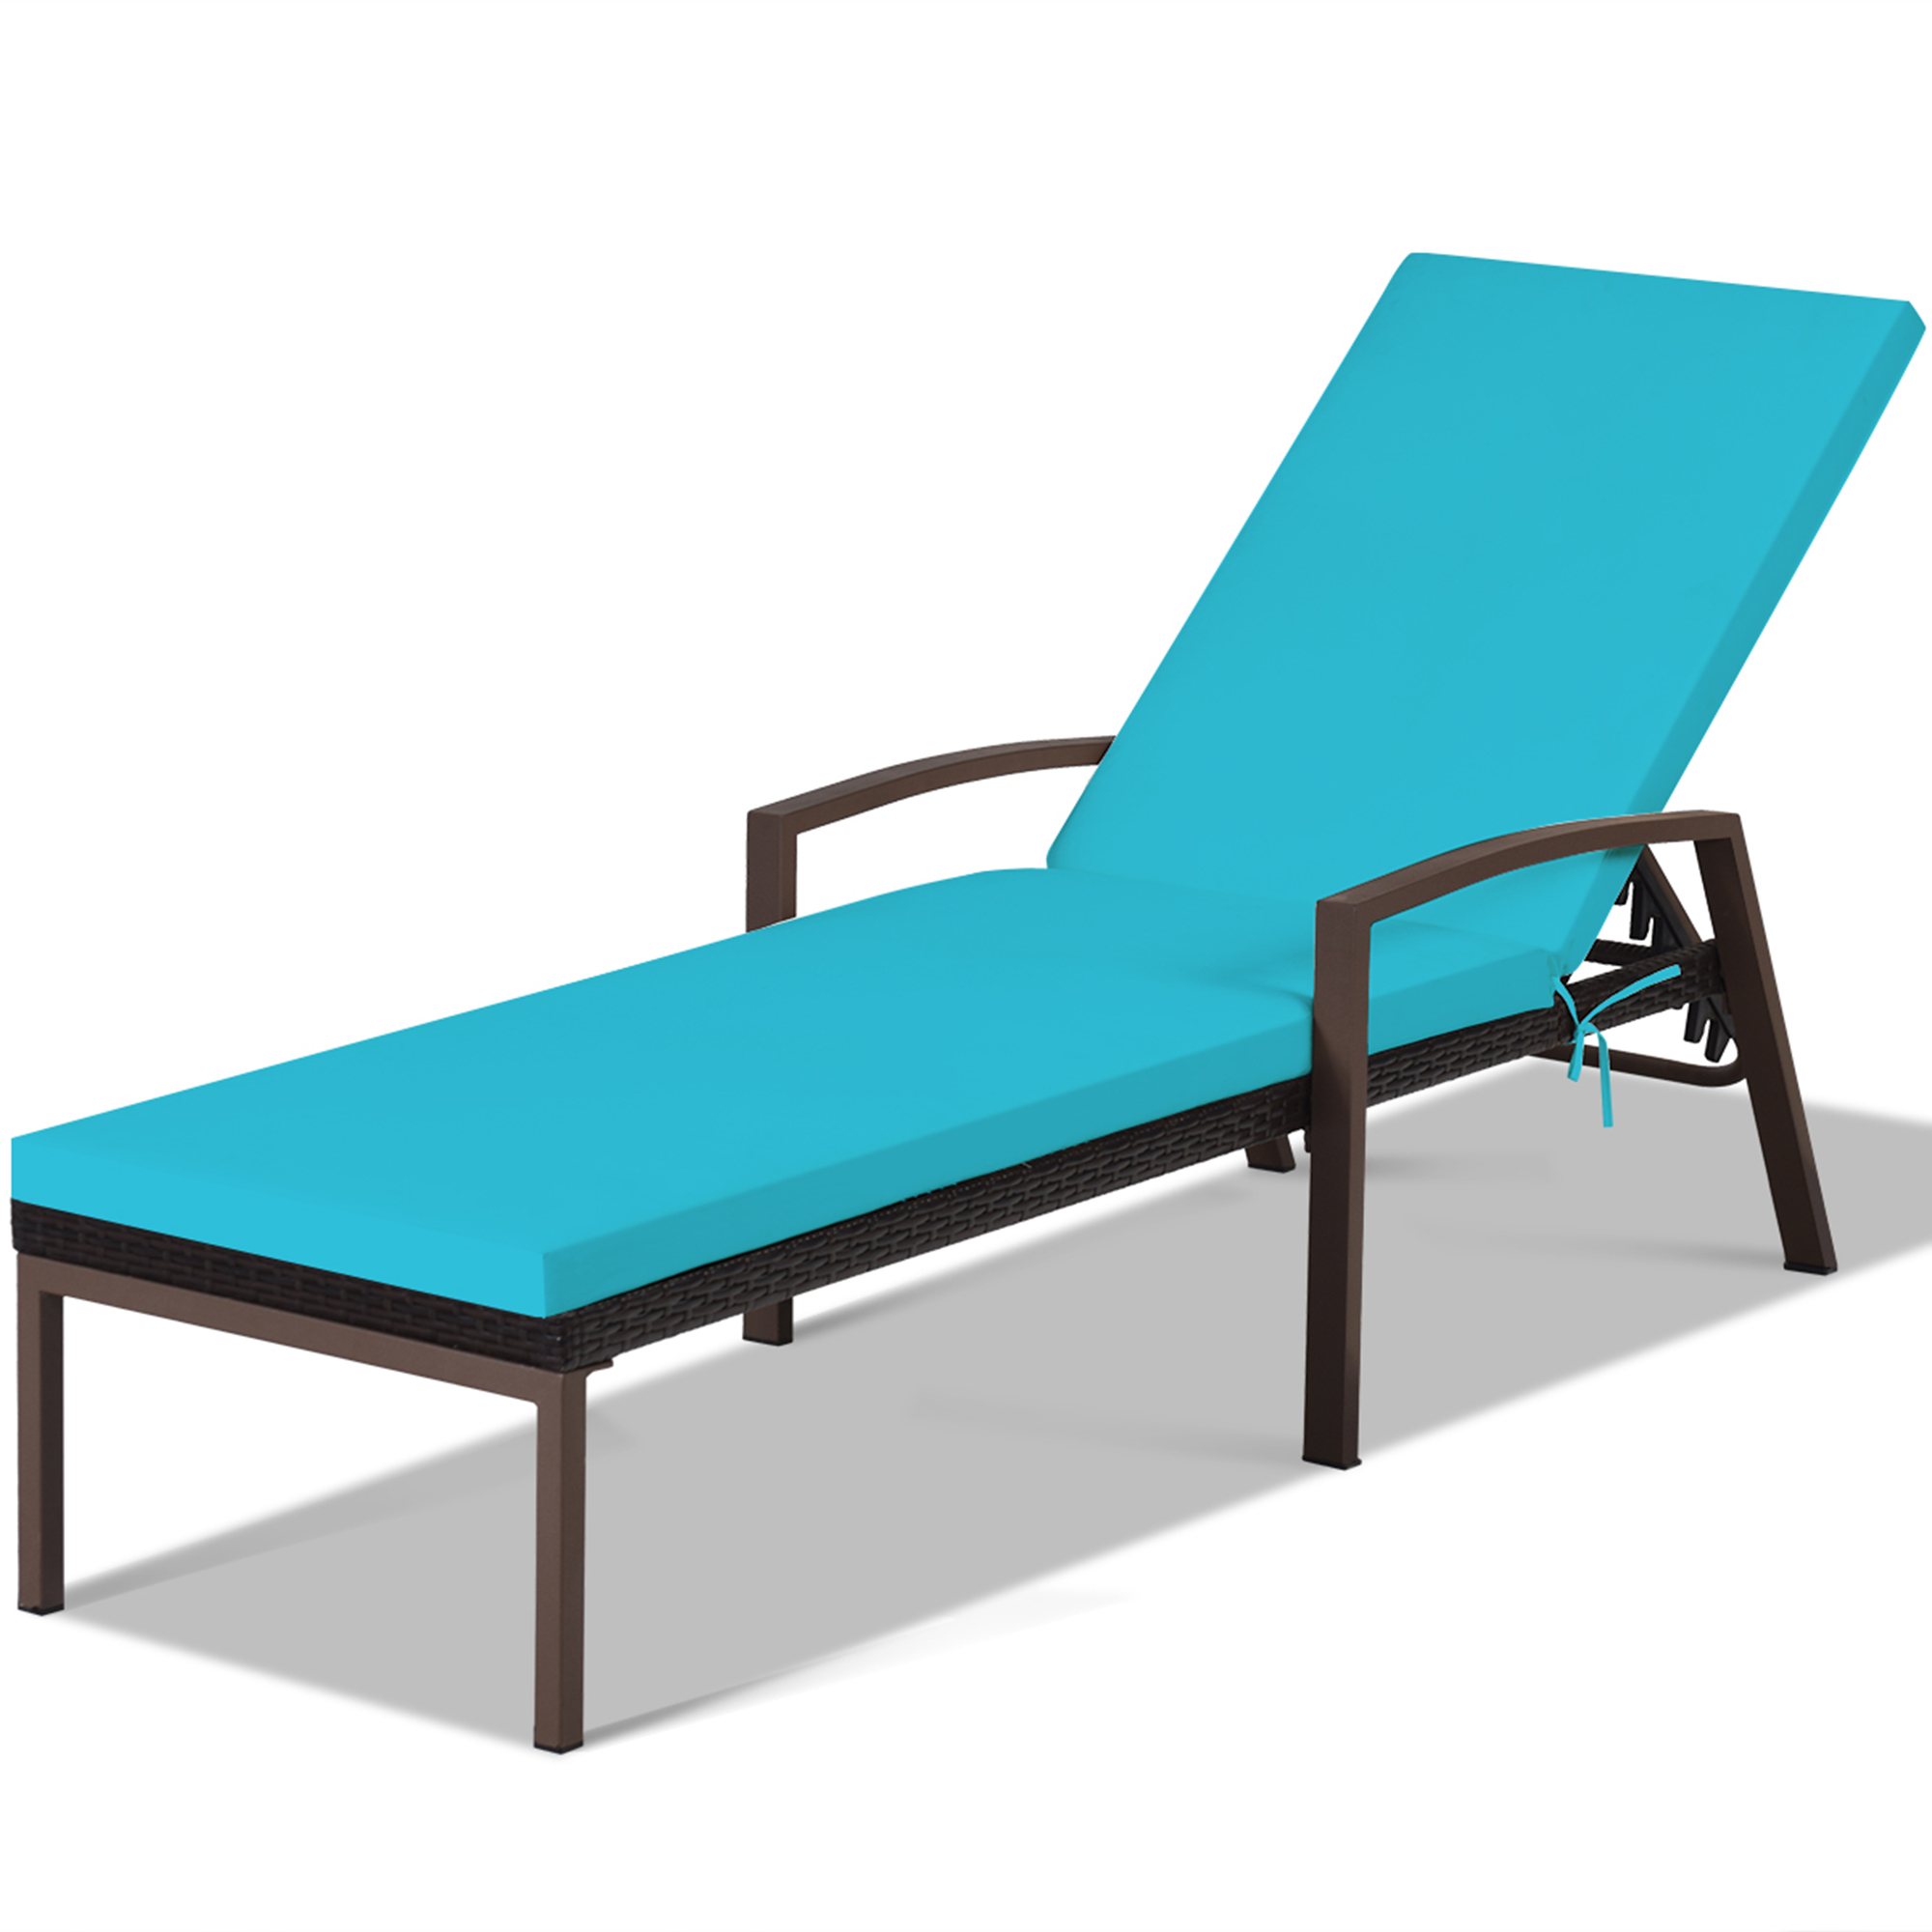 Gymax Adjustable Rattan Chaise Recliner Lounge Chair Patio Outdoor w/ Turquoise Cushion - image 3 of 5